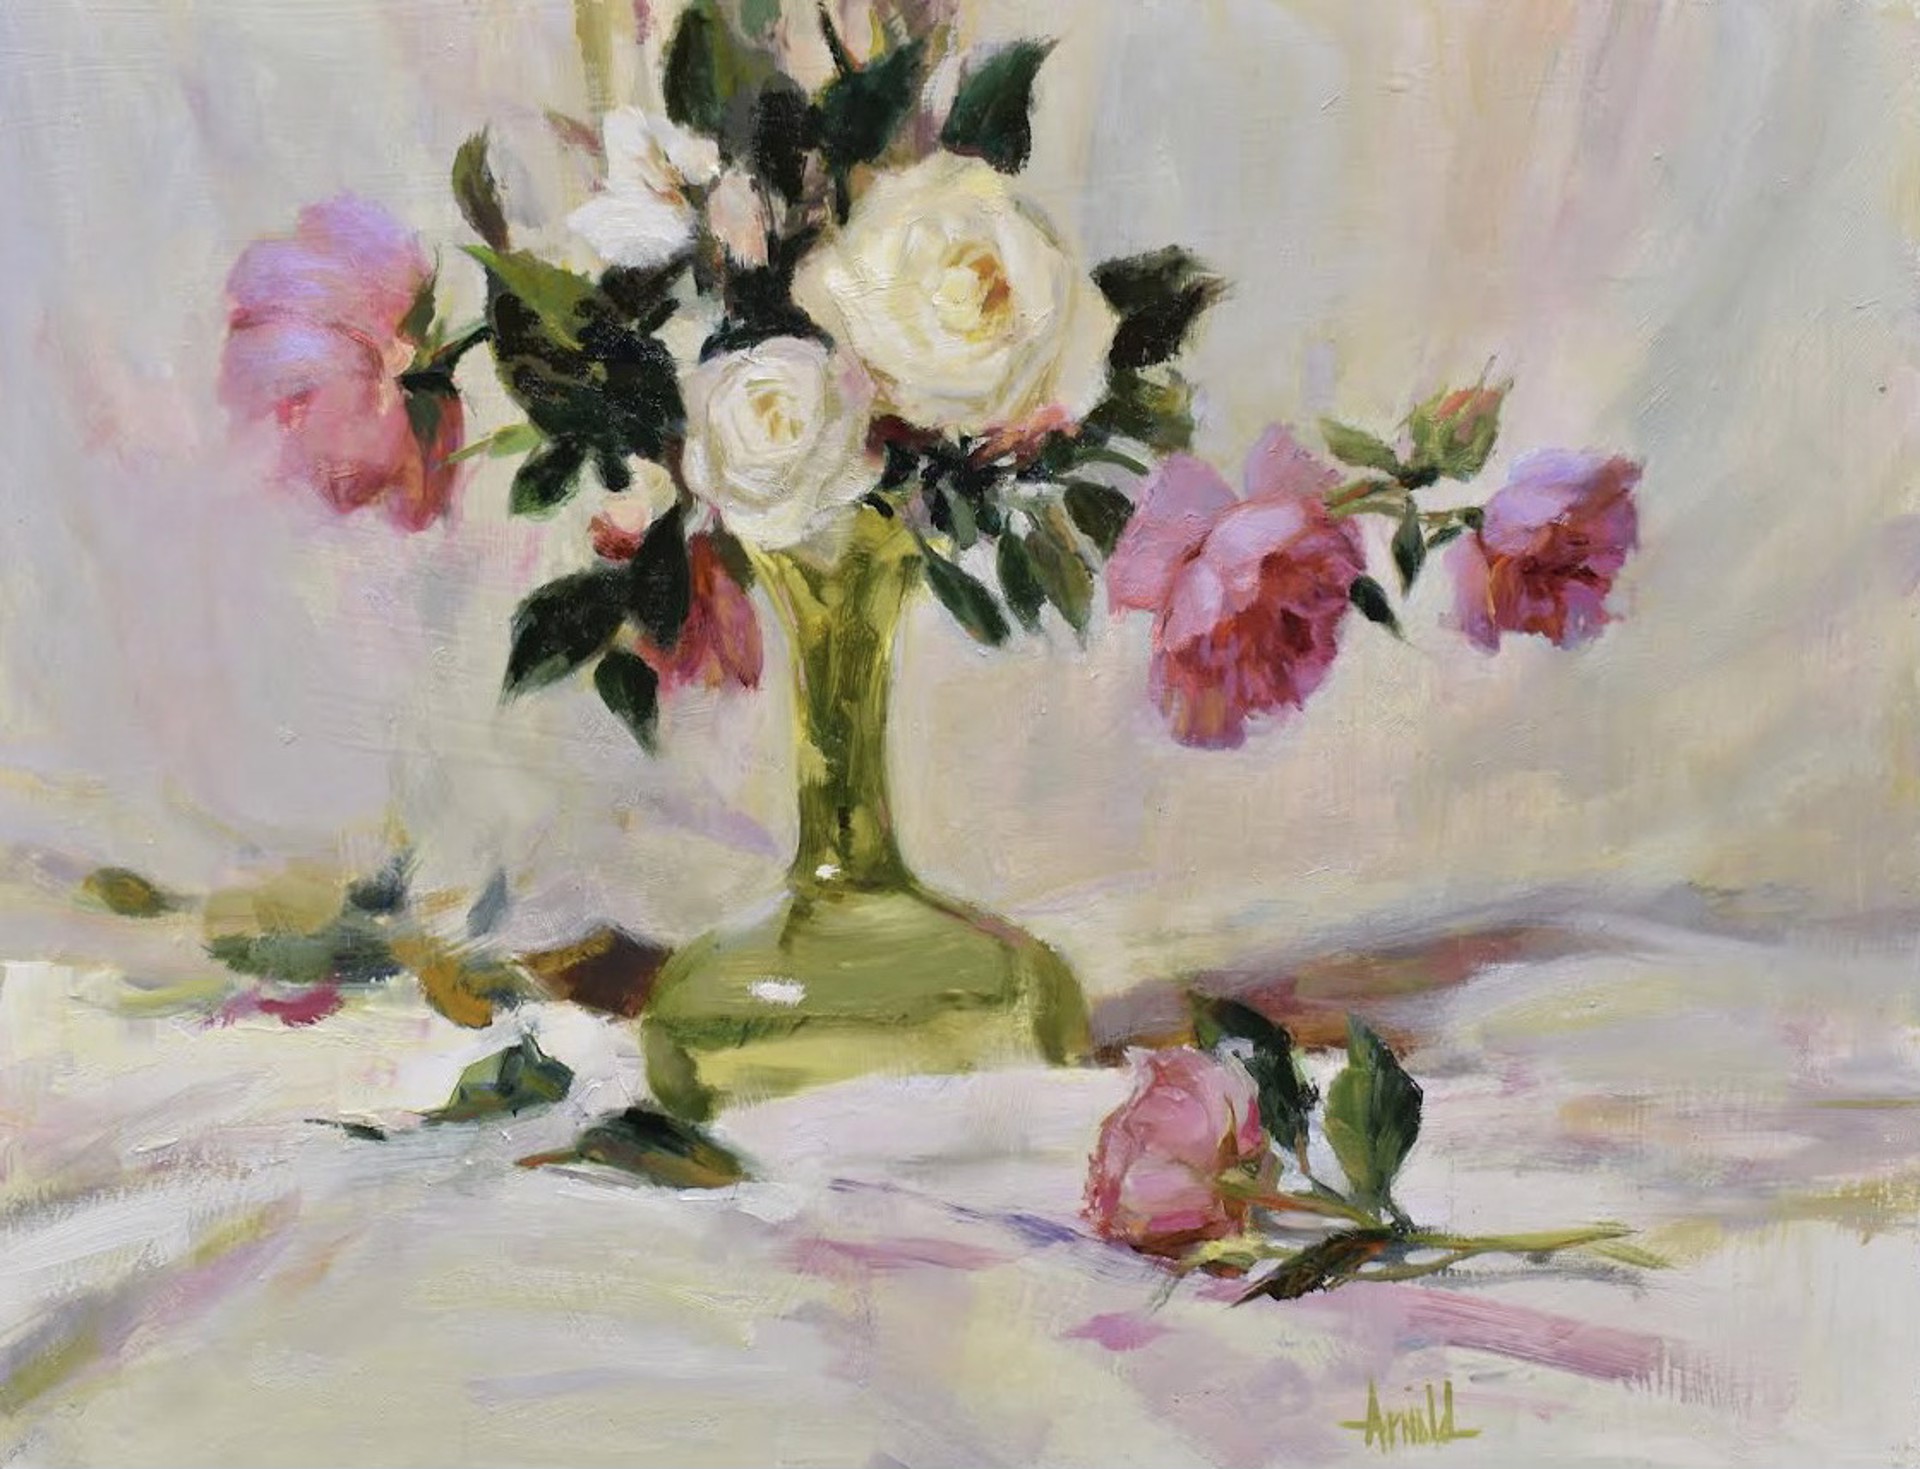 Antique Vase with Roses by Carol Arnold